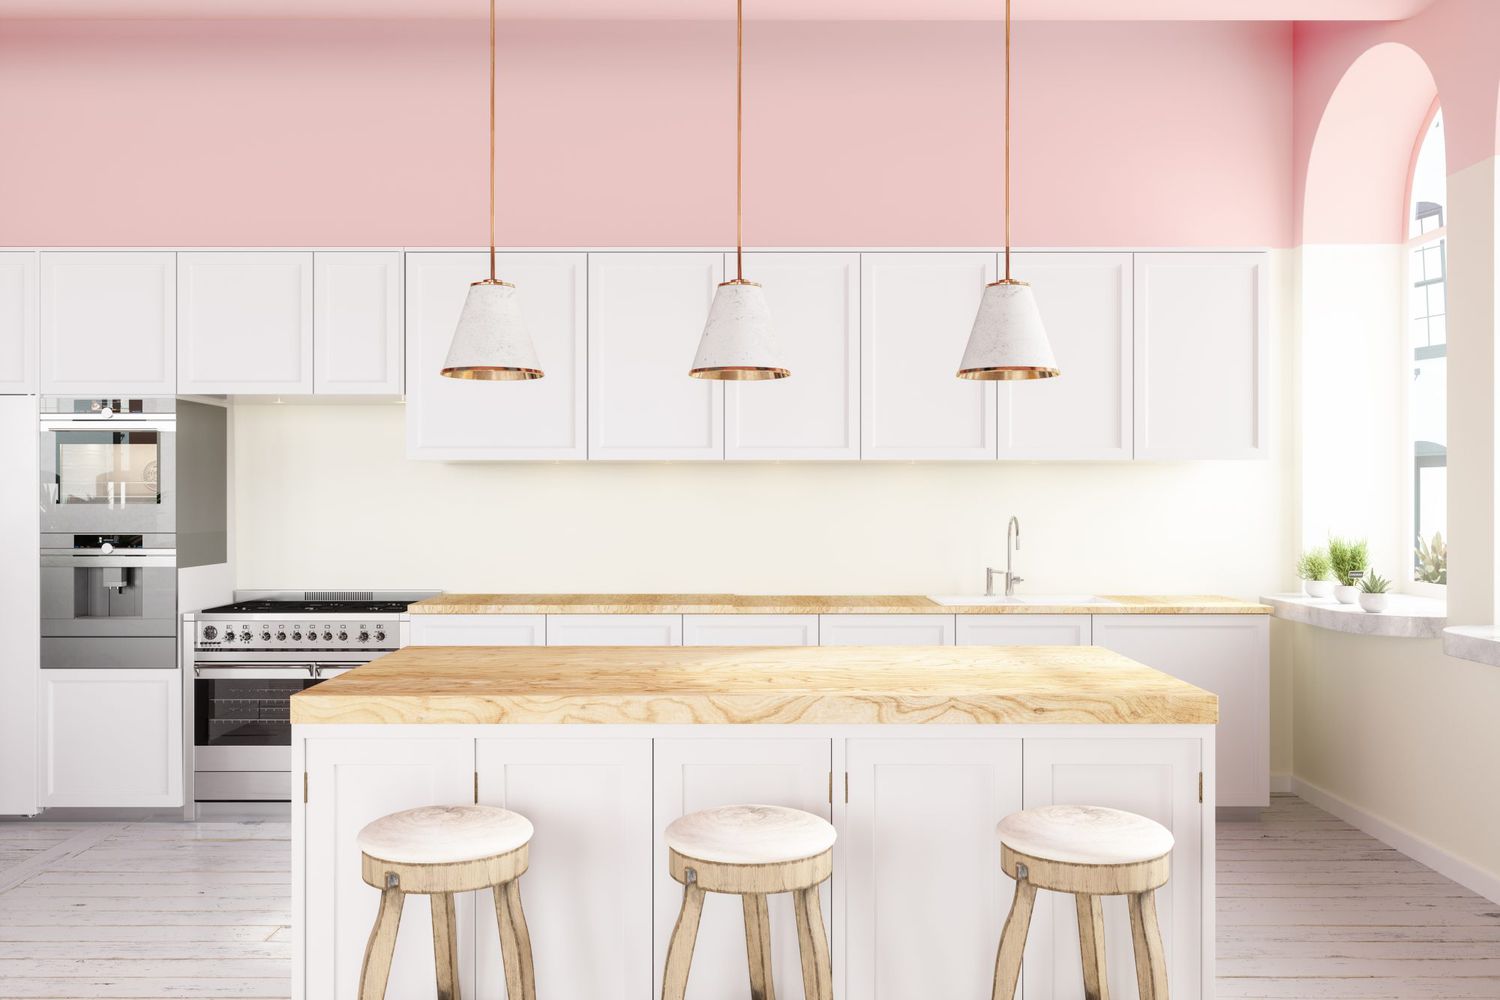 Pink Walled Kitchen With White Cabinets, Pendant Lights, Kitchen Island And Hardwood Floor